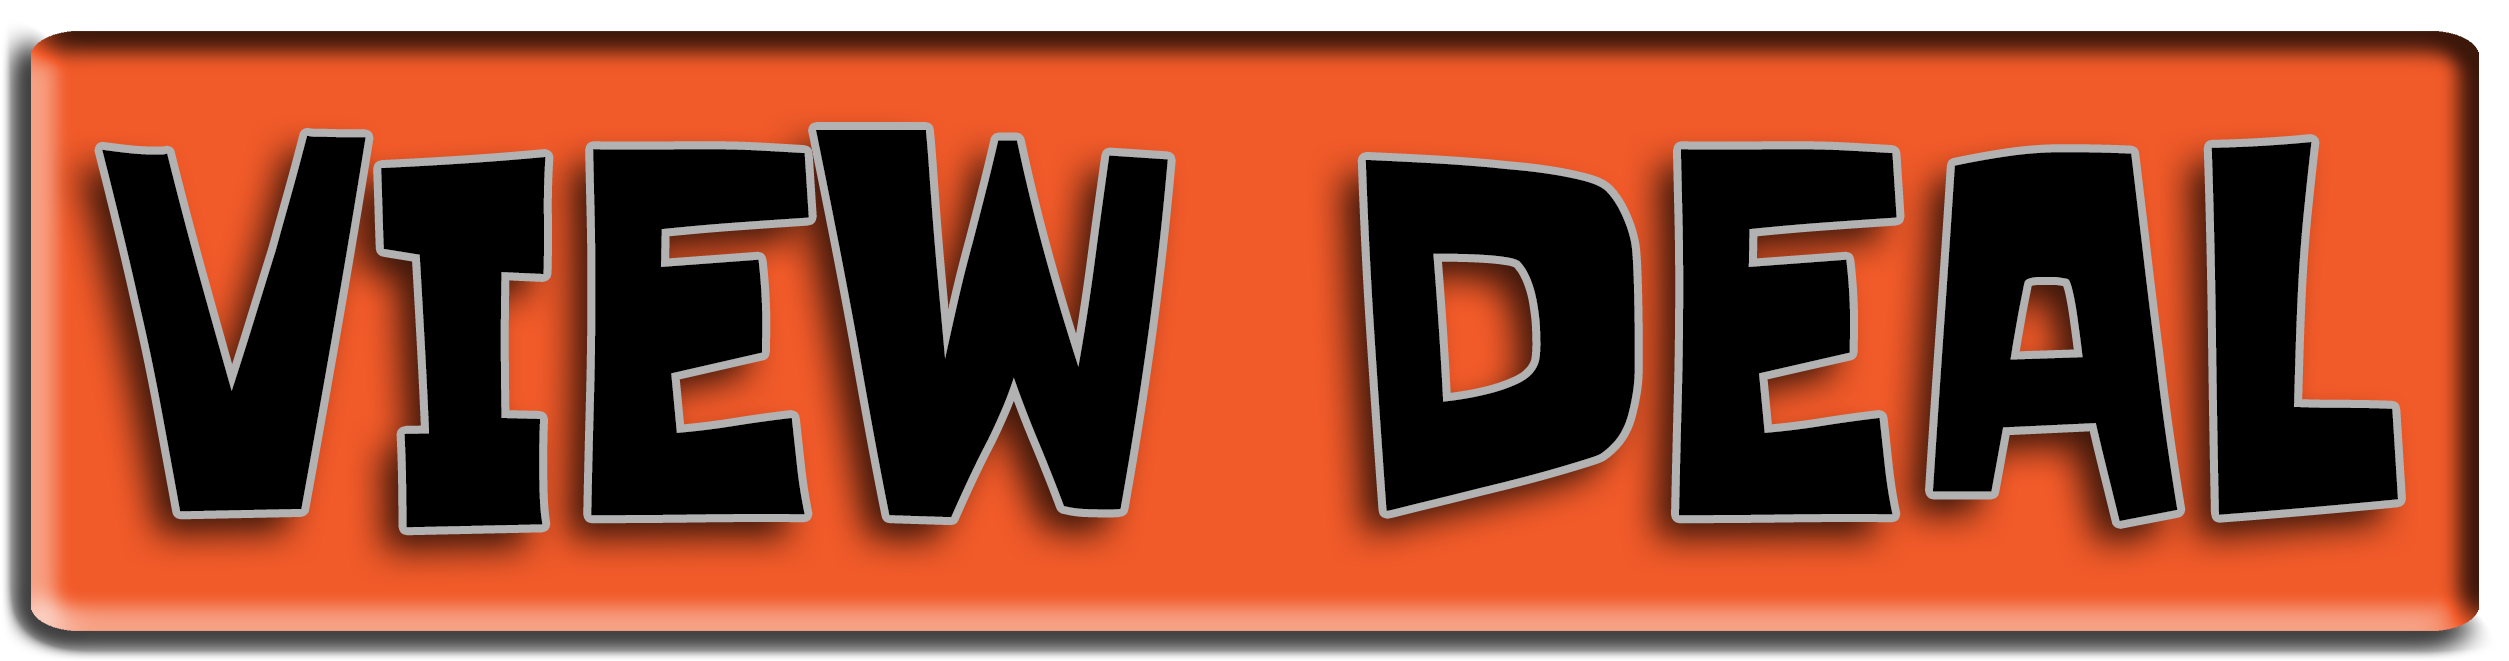 View Deal Button Orange PNG